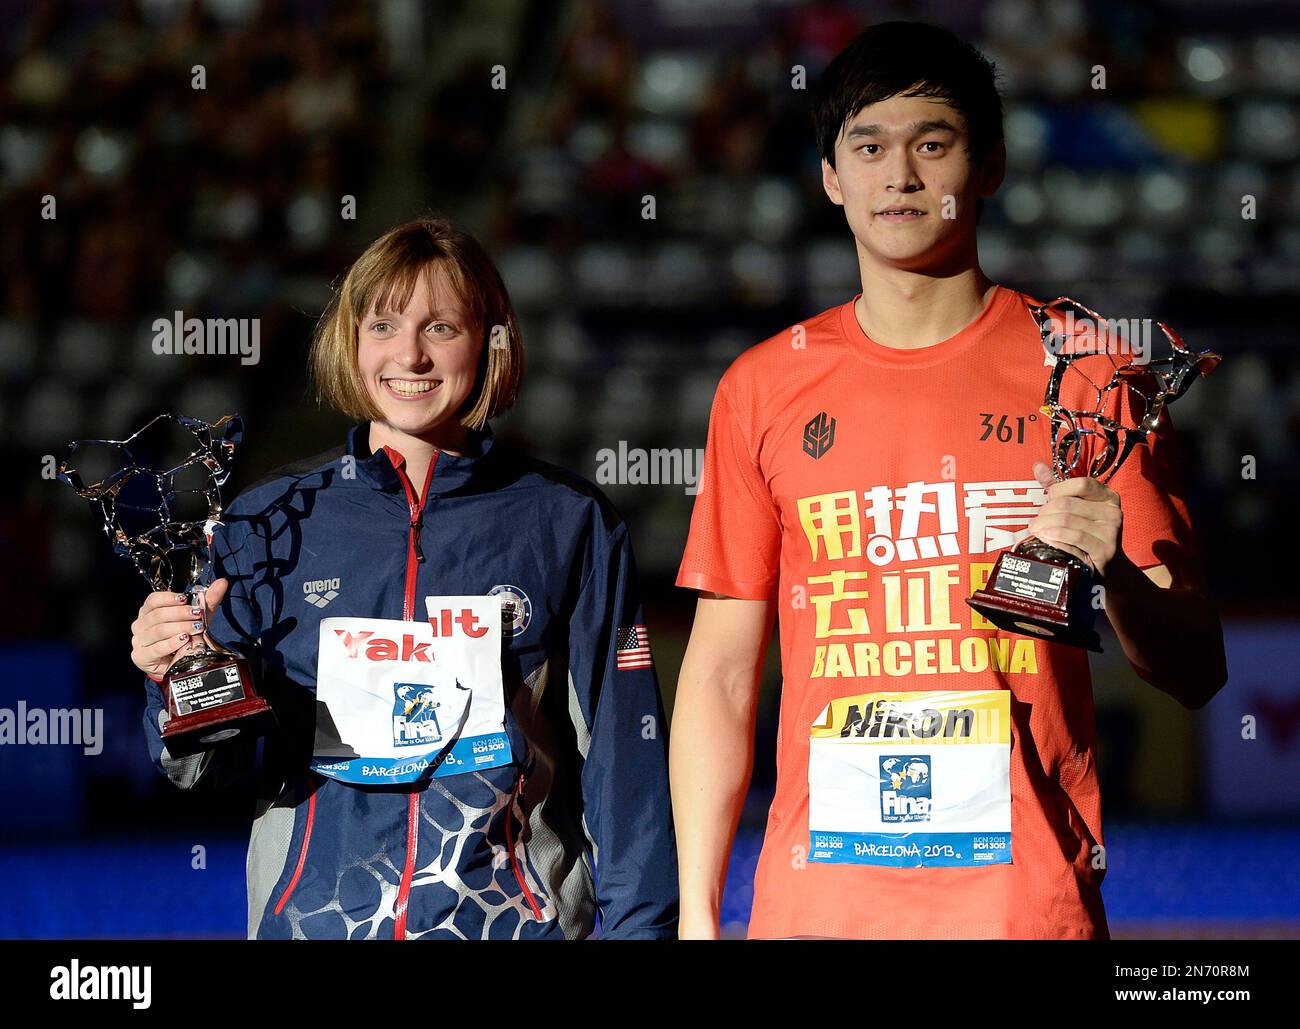 Katie Ledecky of the Unted States, left, holds the FINA Best Female Swimmer of the event trophy and China's Sun Yang holds the Best Male swimmer trophy at the FINA Swimming World Championships in Barcelona, Spain, Sunday, Aug. 4, 2013. (AP Photo/Manu Fernandez) Stock Photo